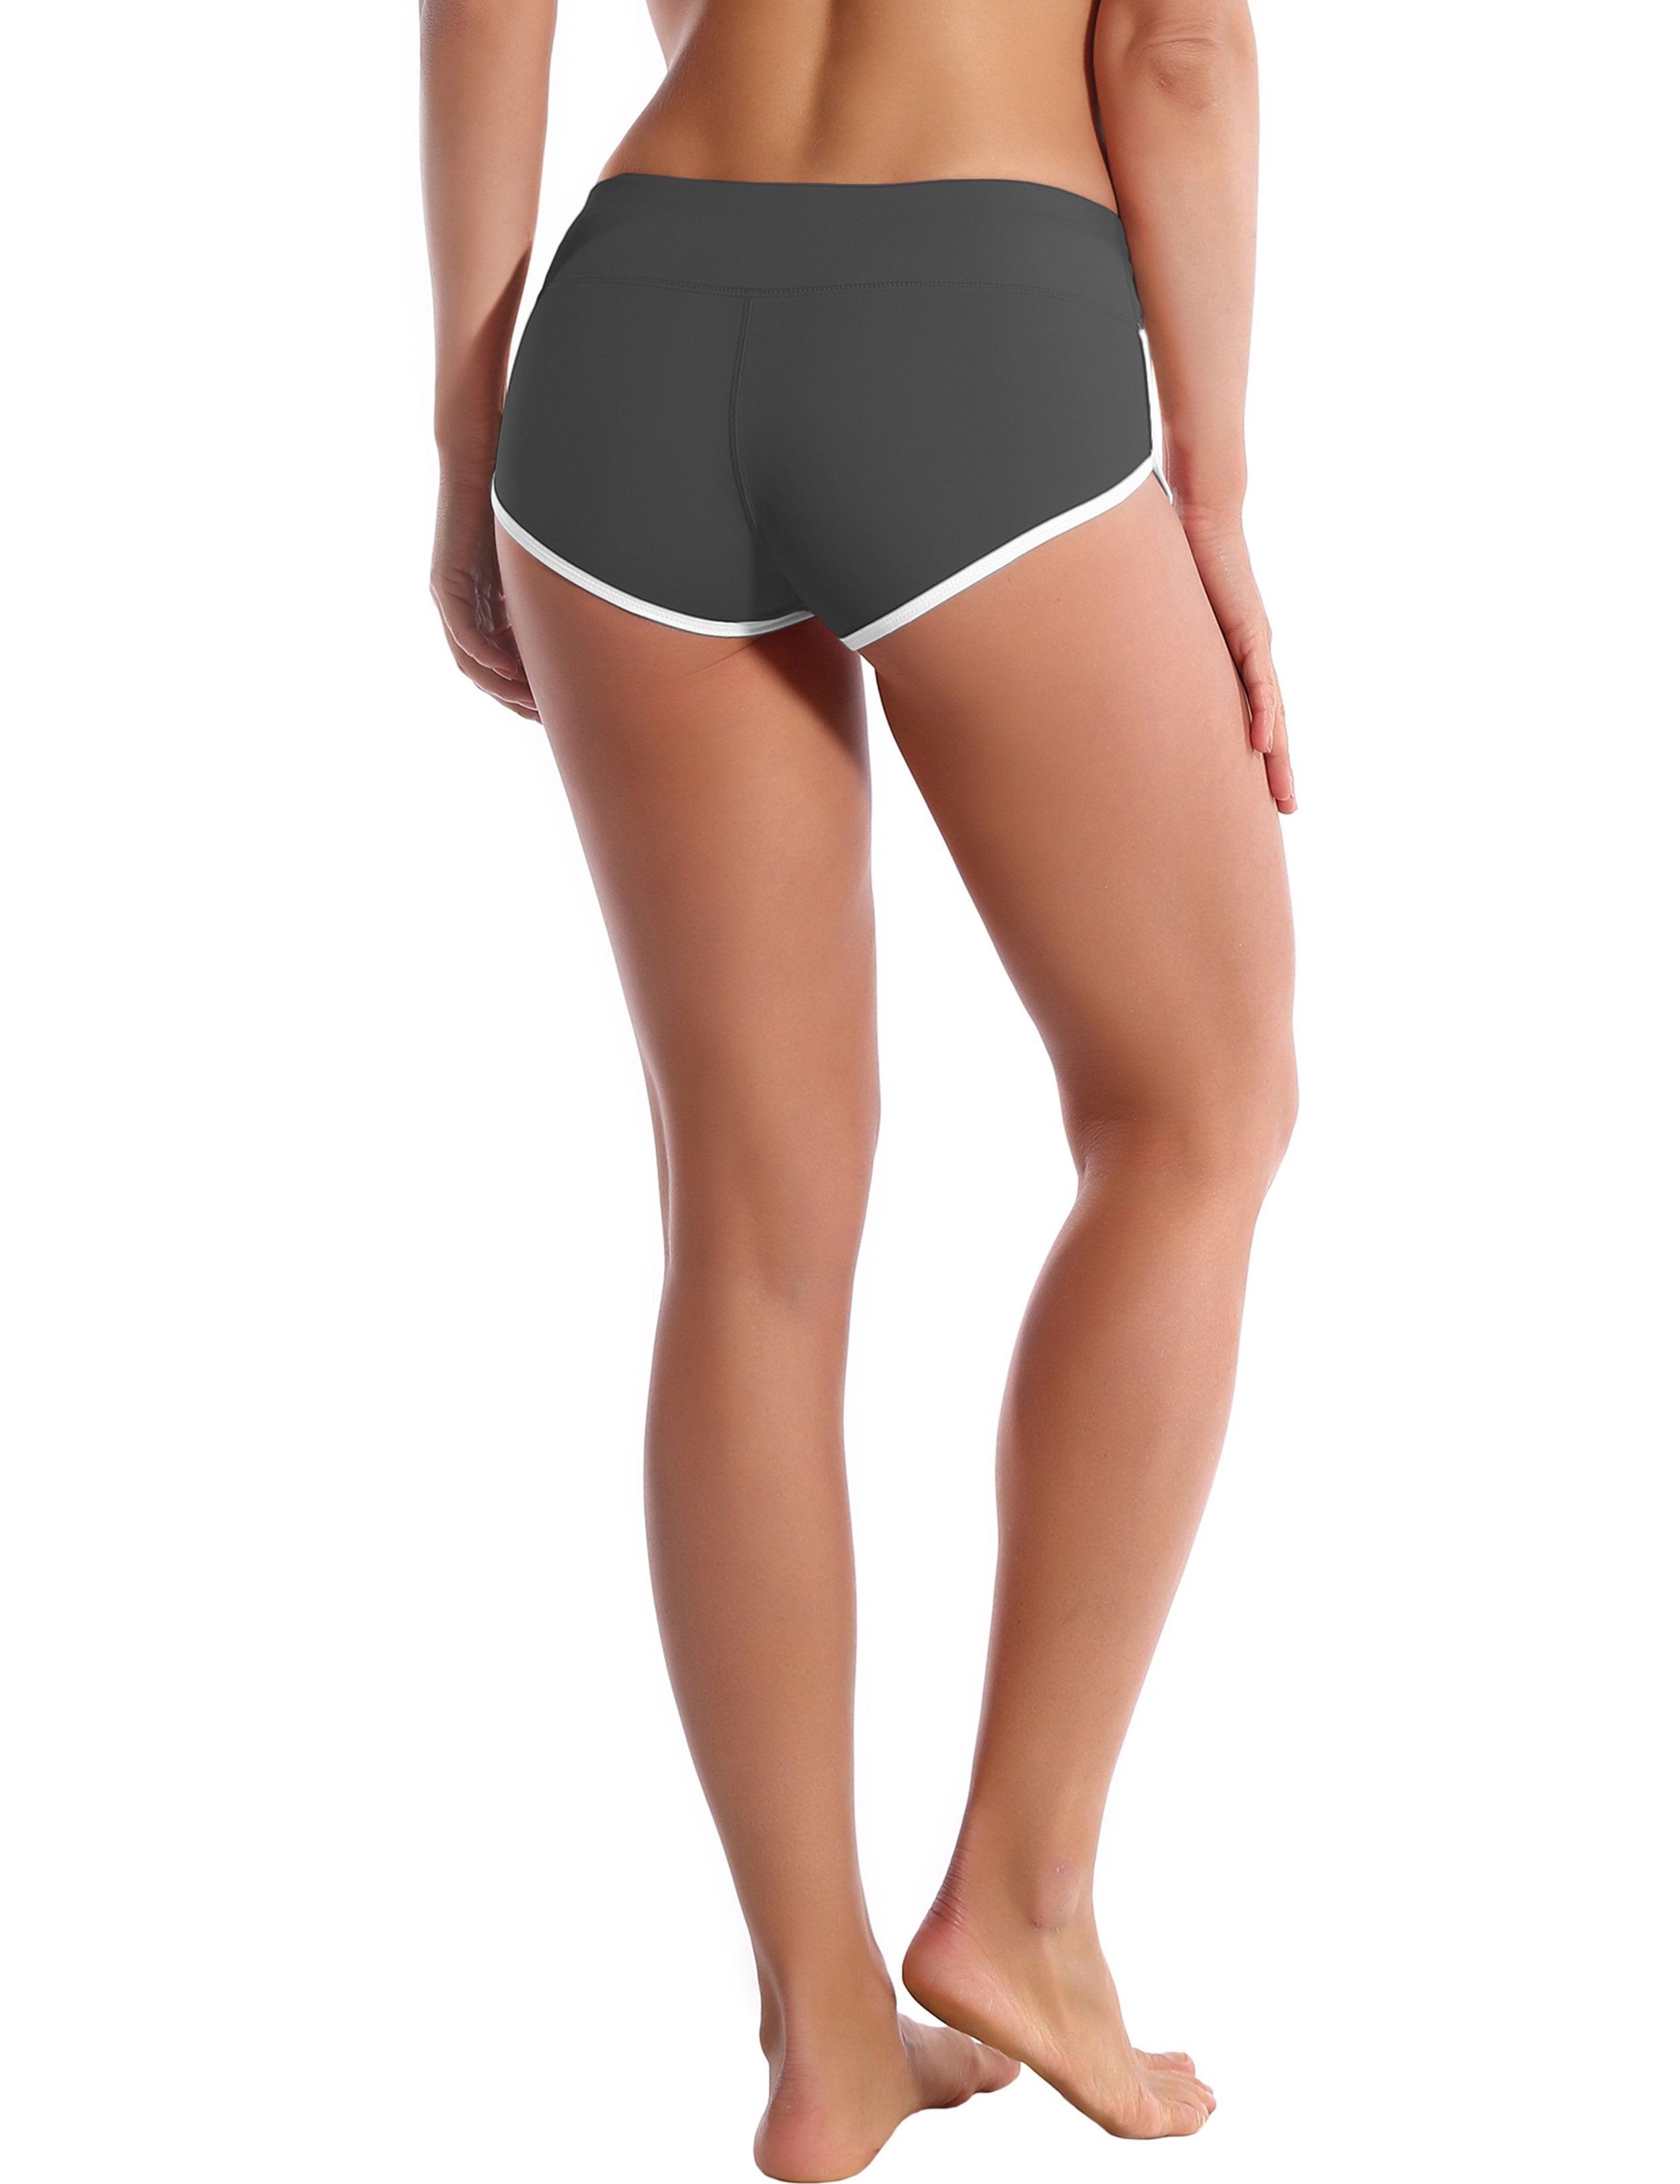 Sexy Booty Golf Shorts shadowcharcoal Sleek, soft, smooth and totally comfortable: our newest sexy style is here. Softest-ever fabric High elasticity High density 4-way stretch Fabric doesn't attract lint easily No see-through Moisture-wicking Machine wash 75%Nylon/25%Spandex